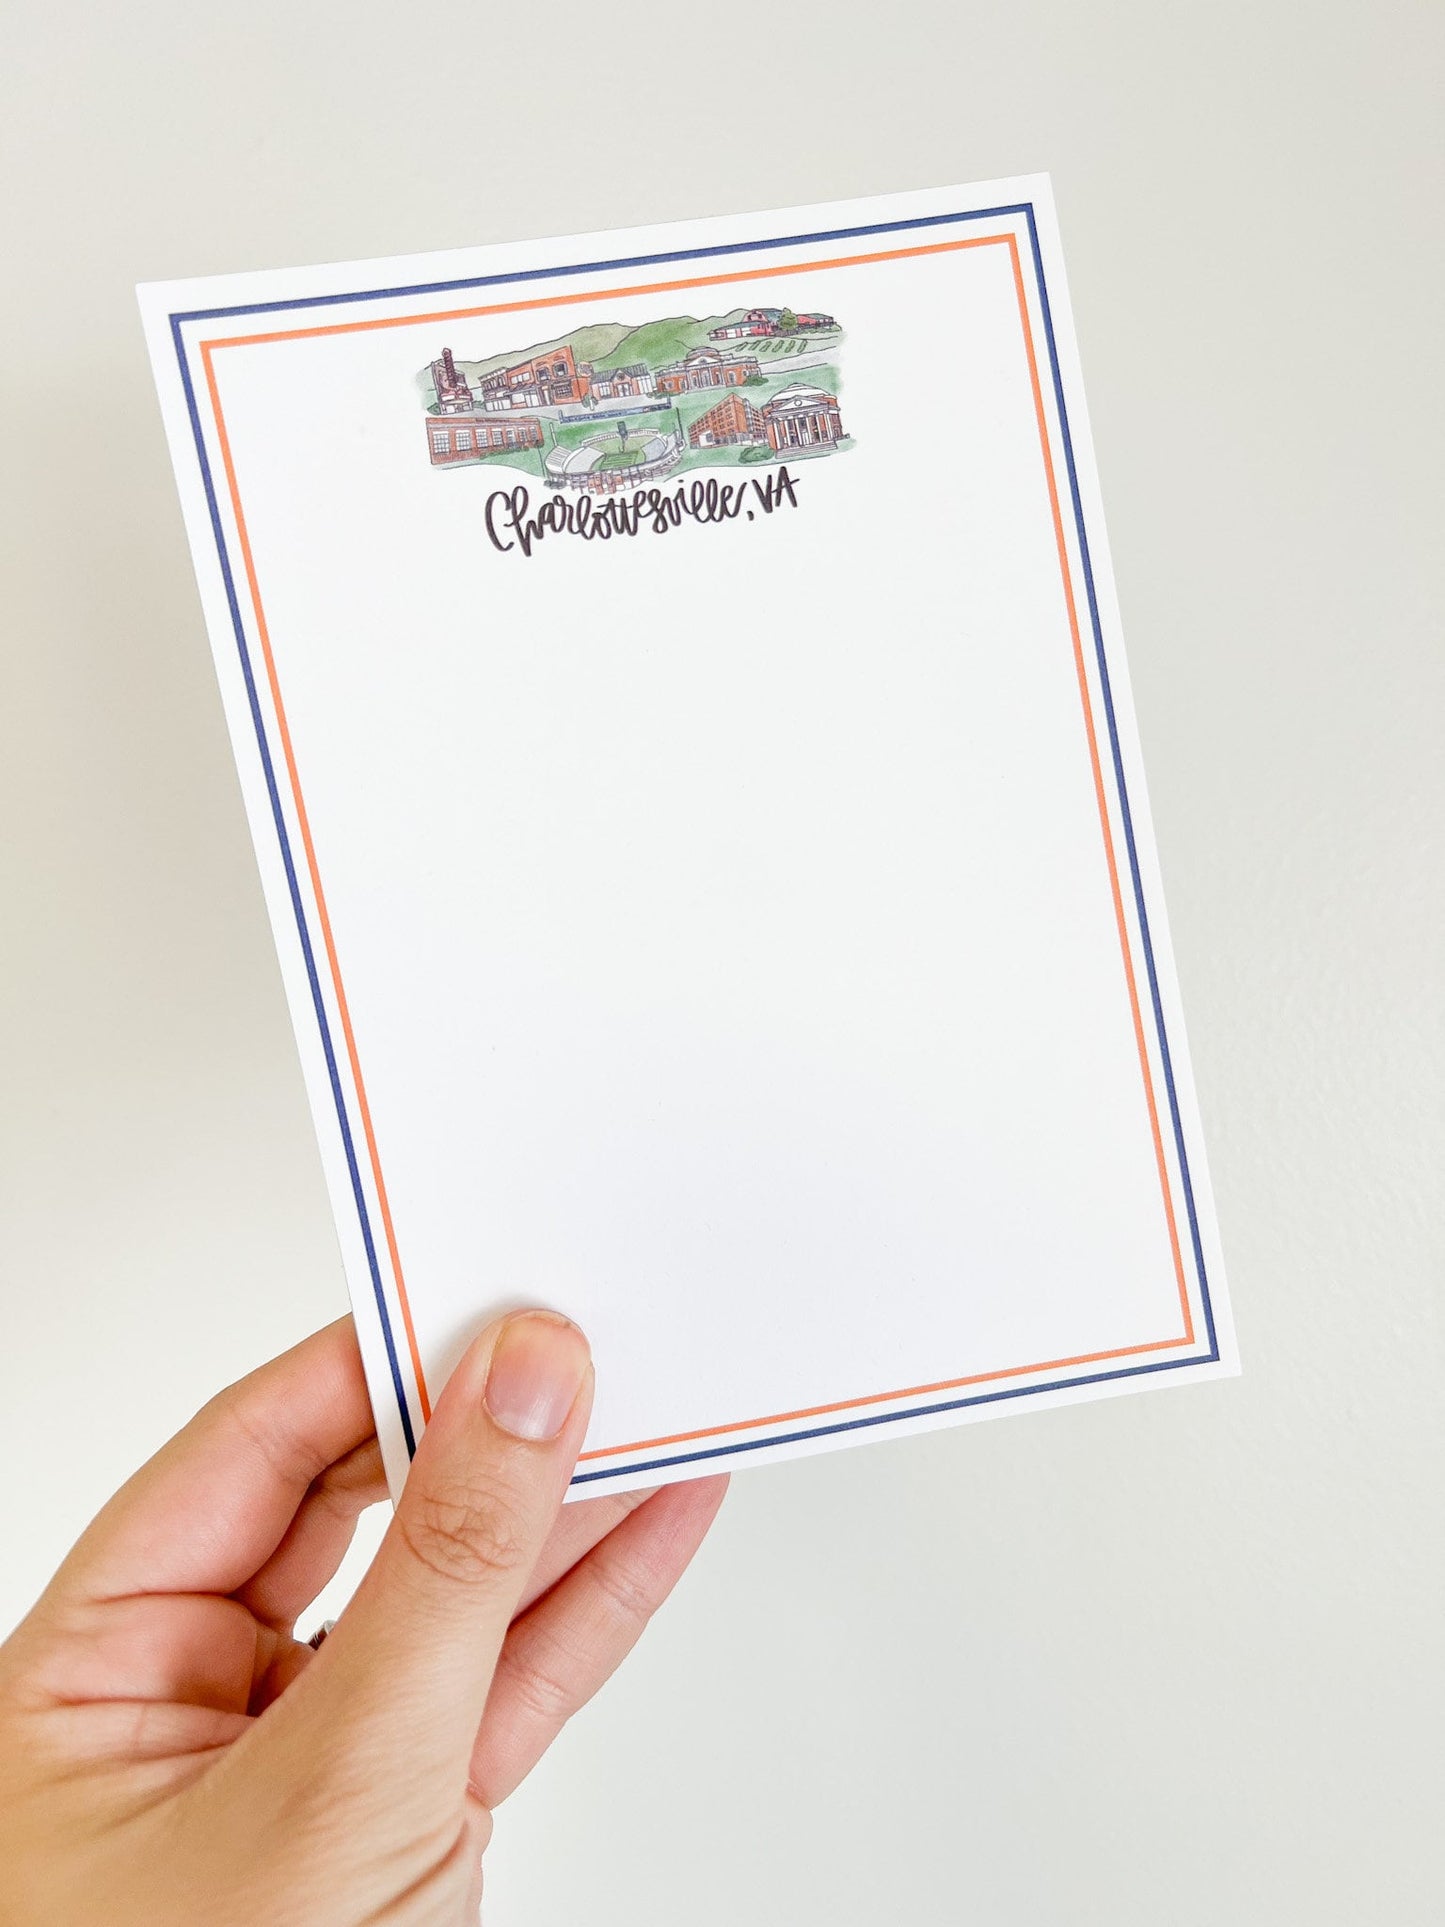 Notepad with navy and orange boarder. Charlottesville Virginia landmarks grouped together in a skyline design at the top with the words Charlottesville, VA below.